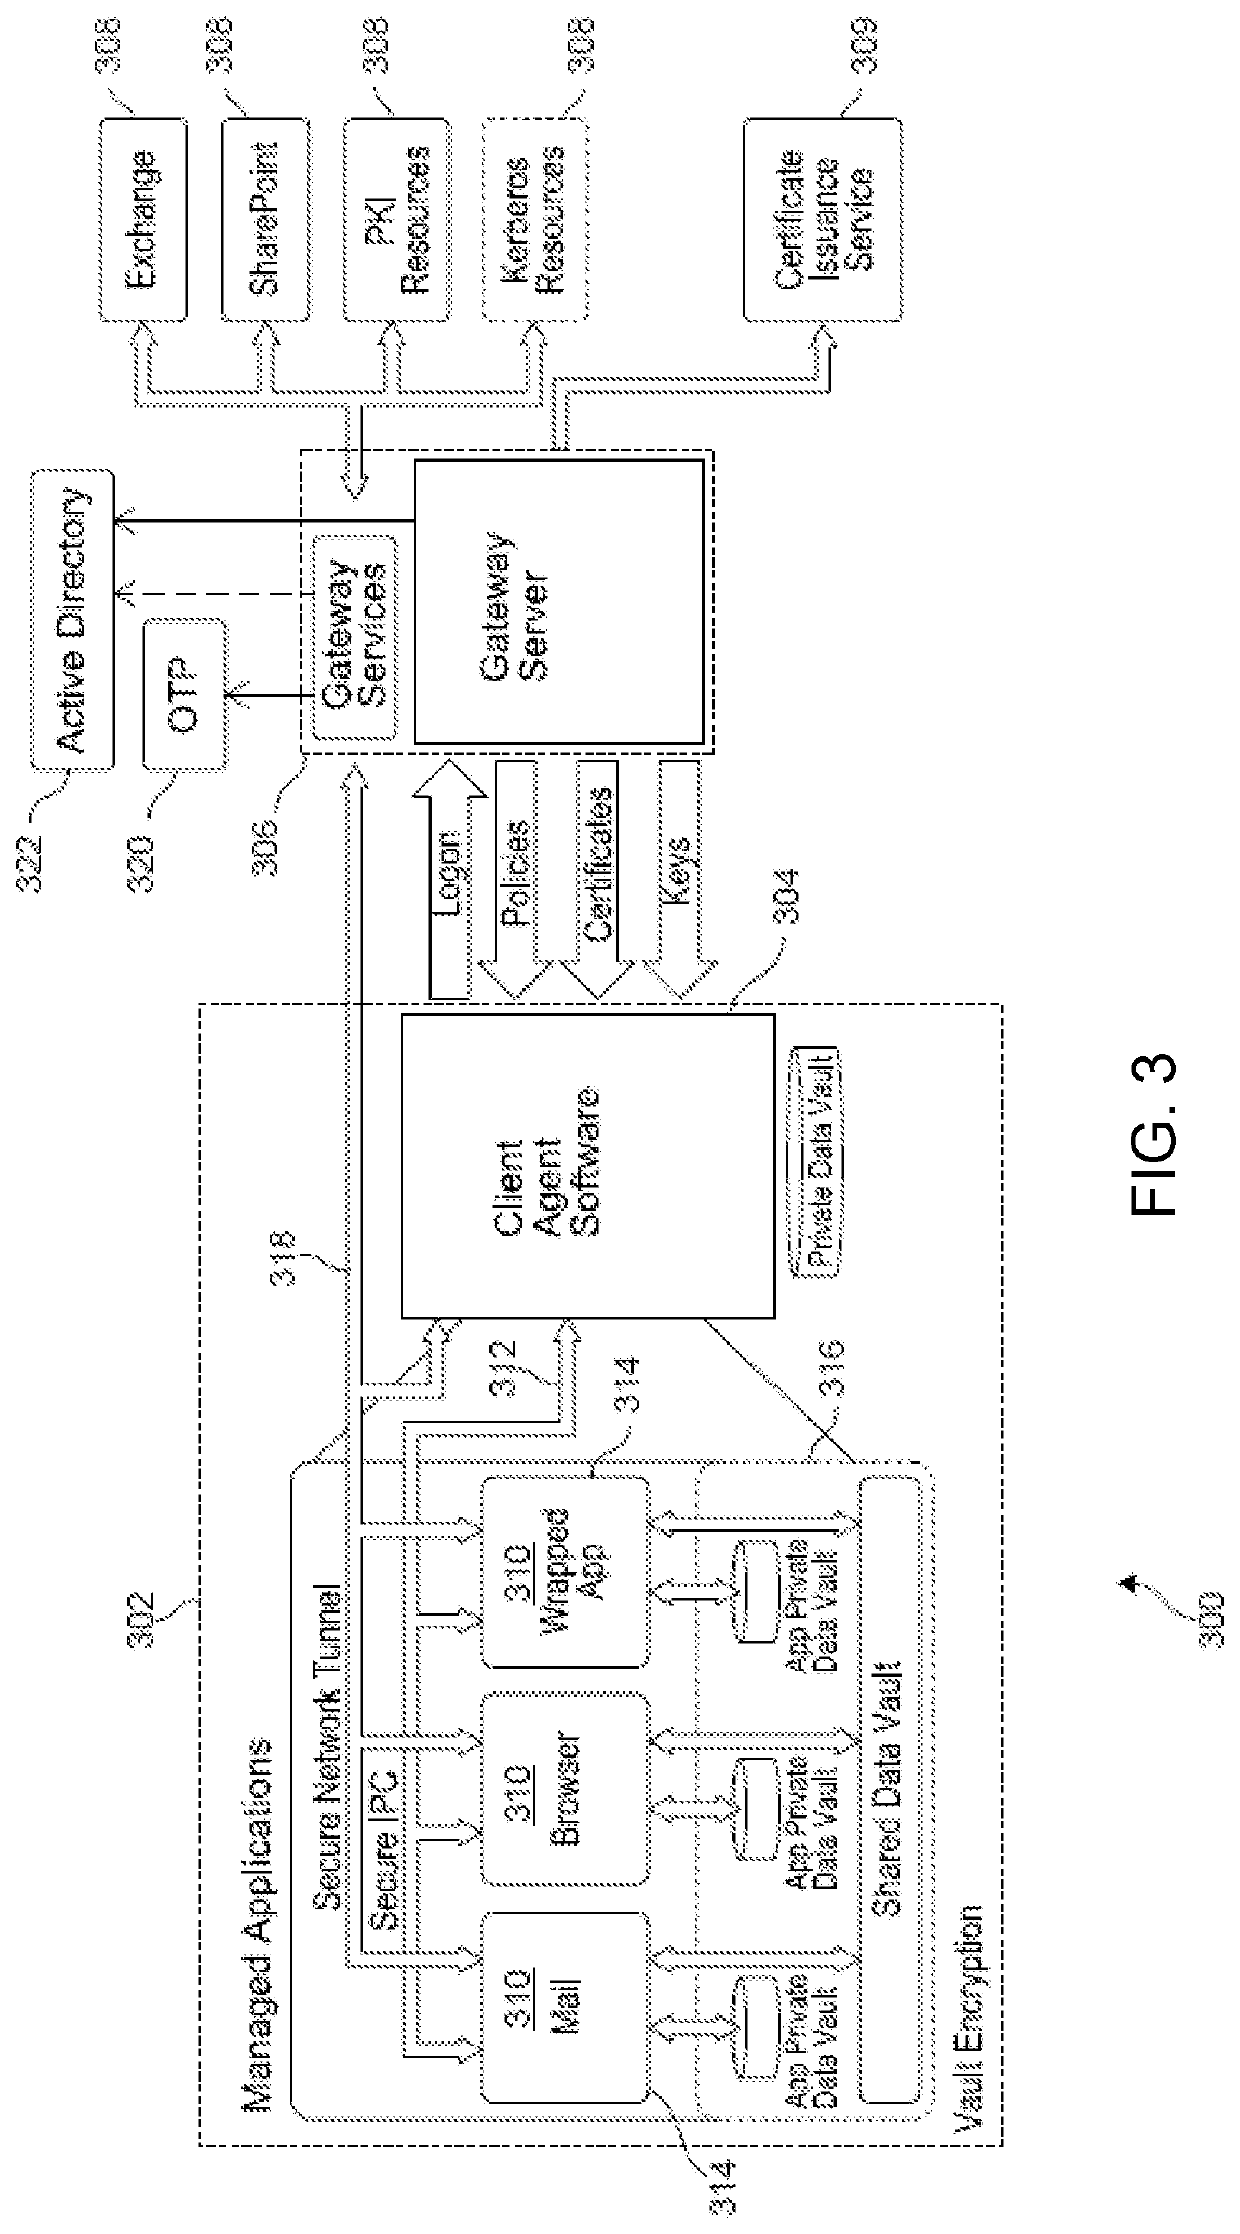 Systems and methods for securely managing browser plugins via embedded browser